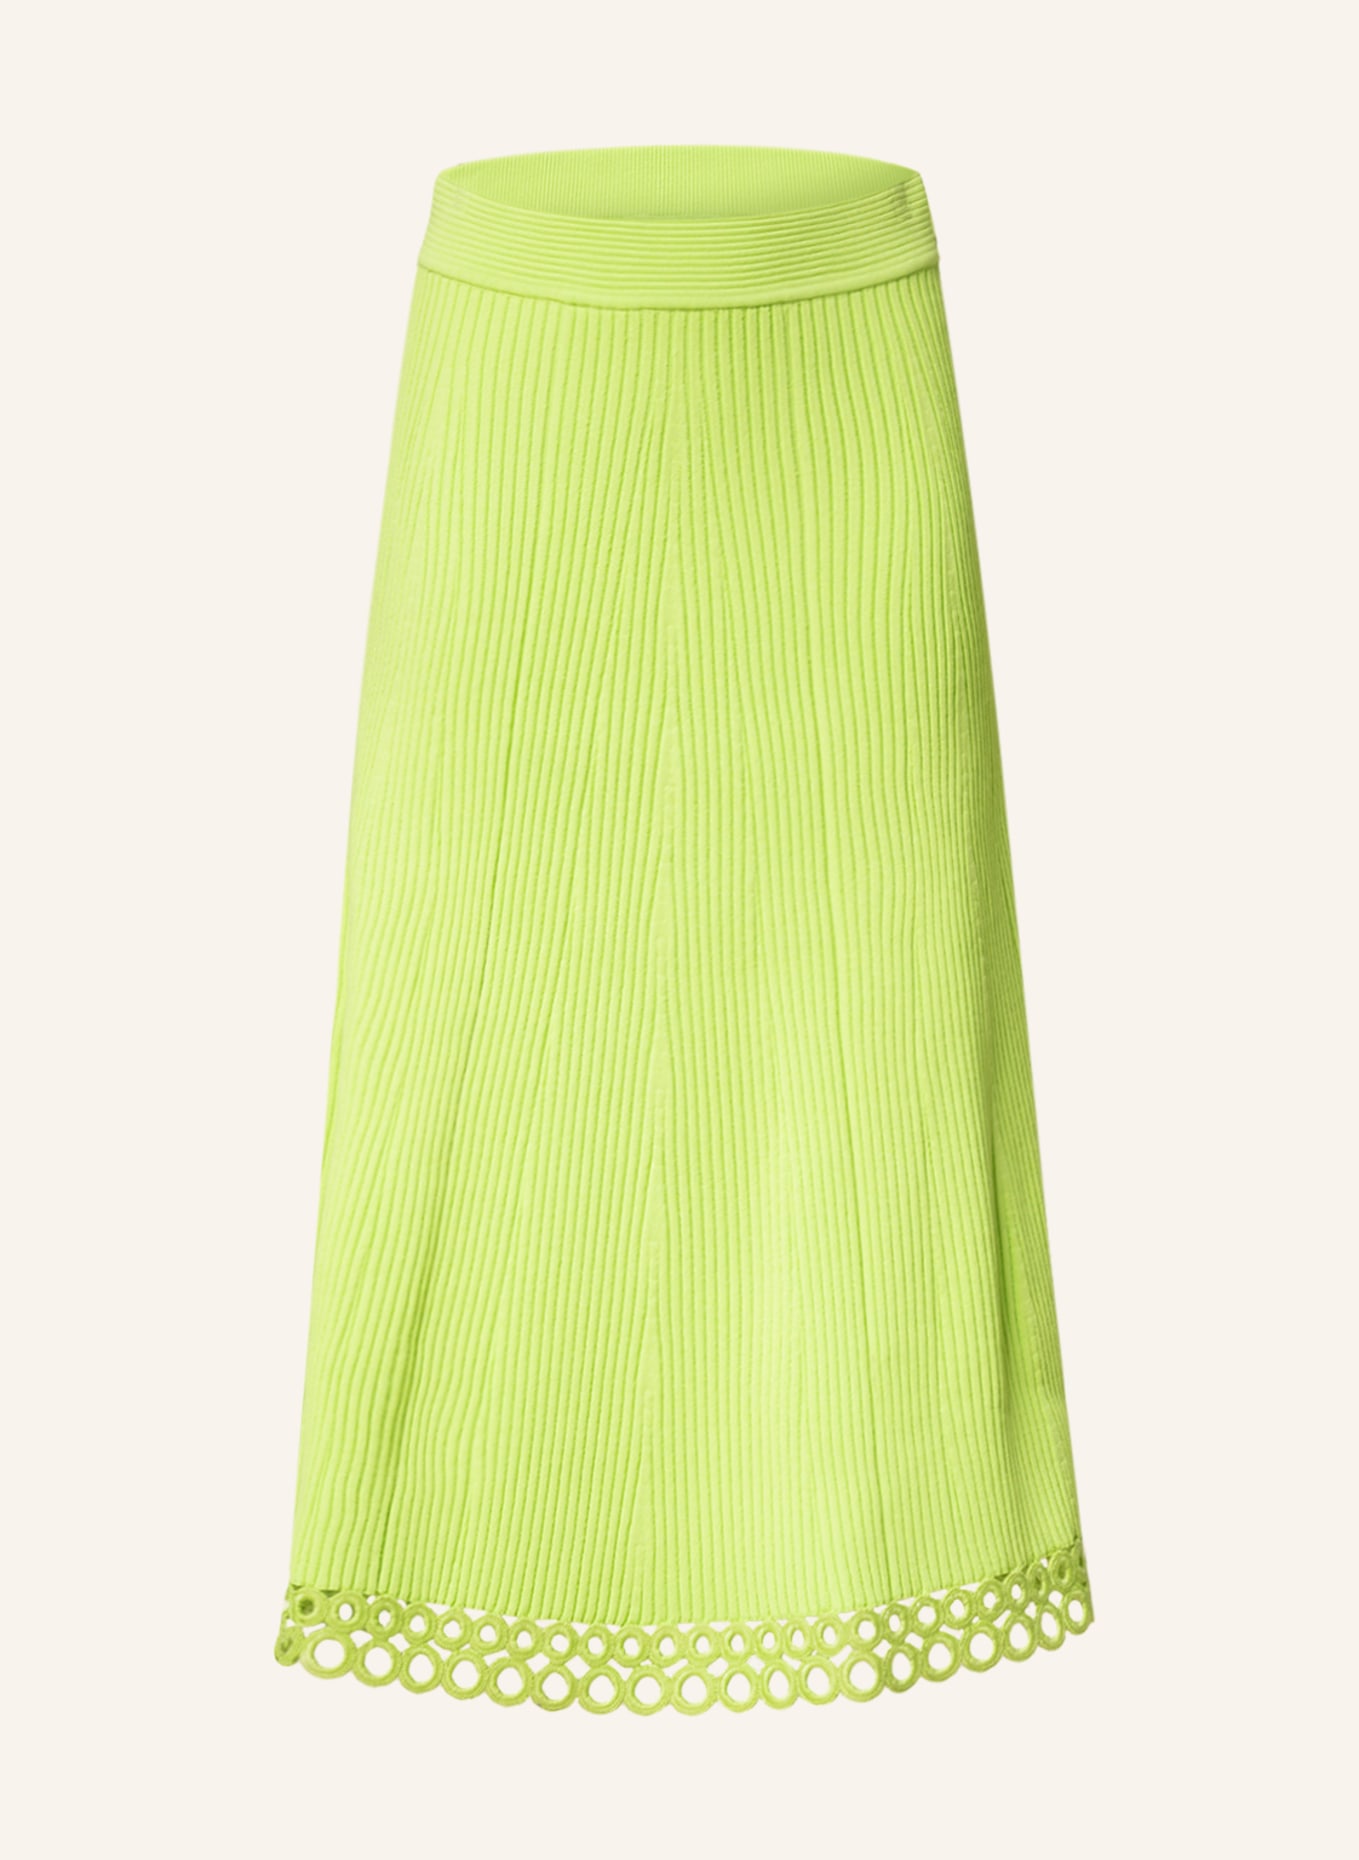 SIMKHAI Knit skirt LIVINA with lace, Color: NEON YELLOW (Image 1)